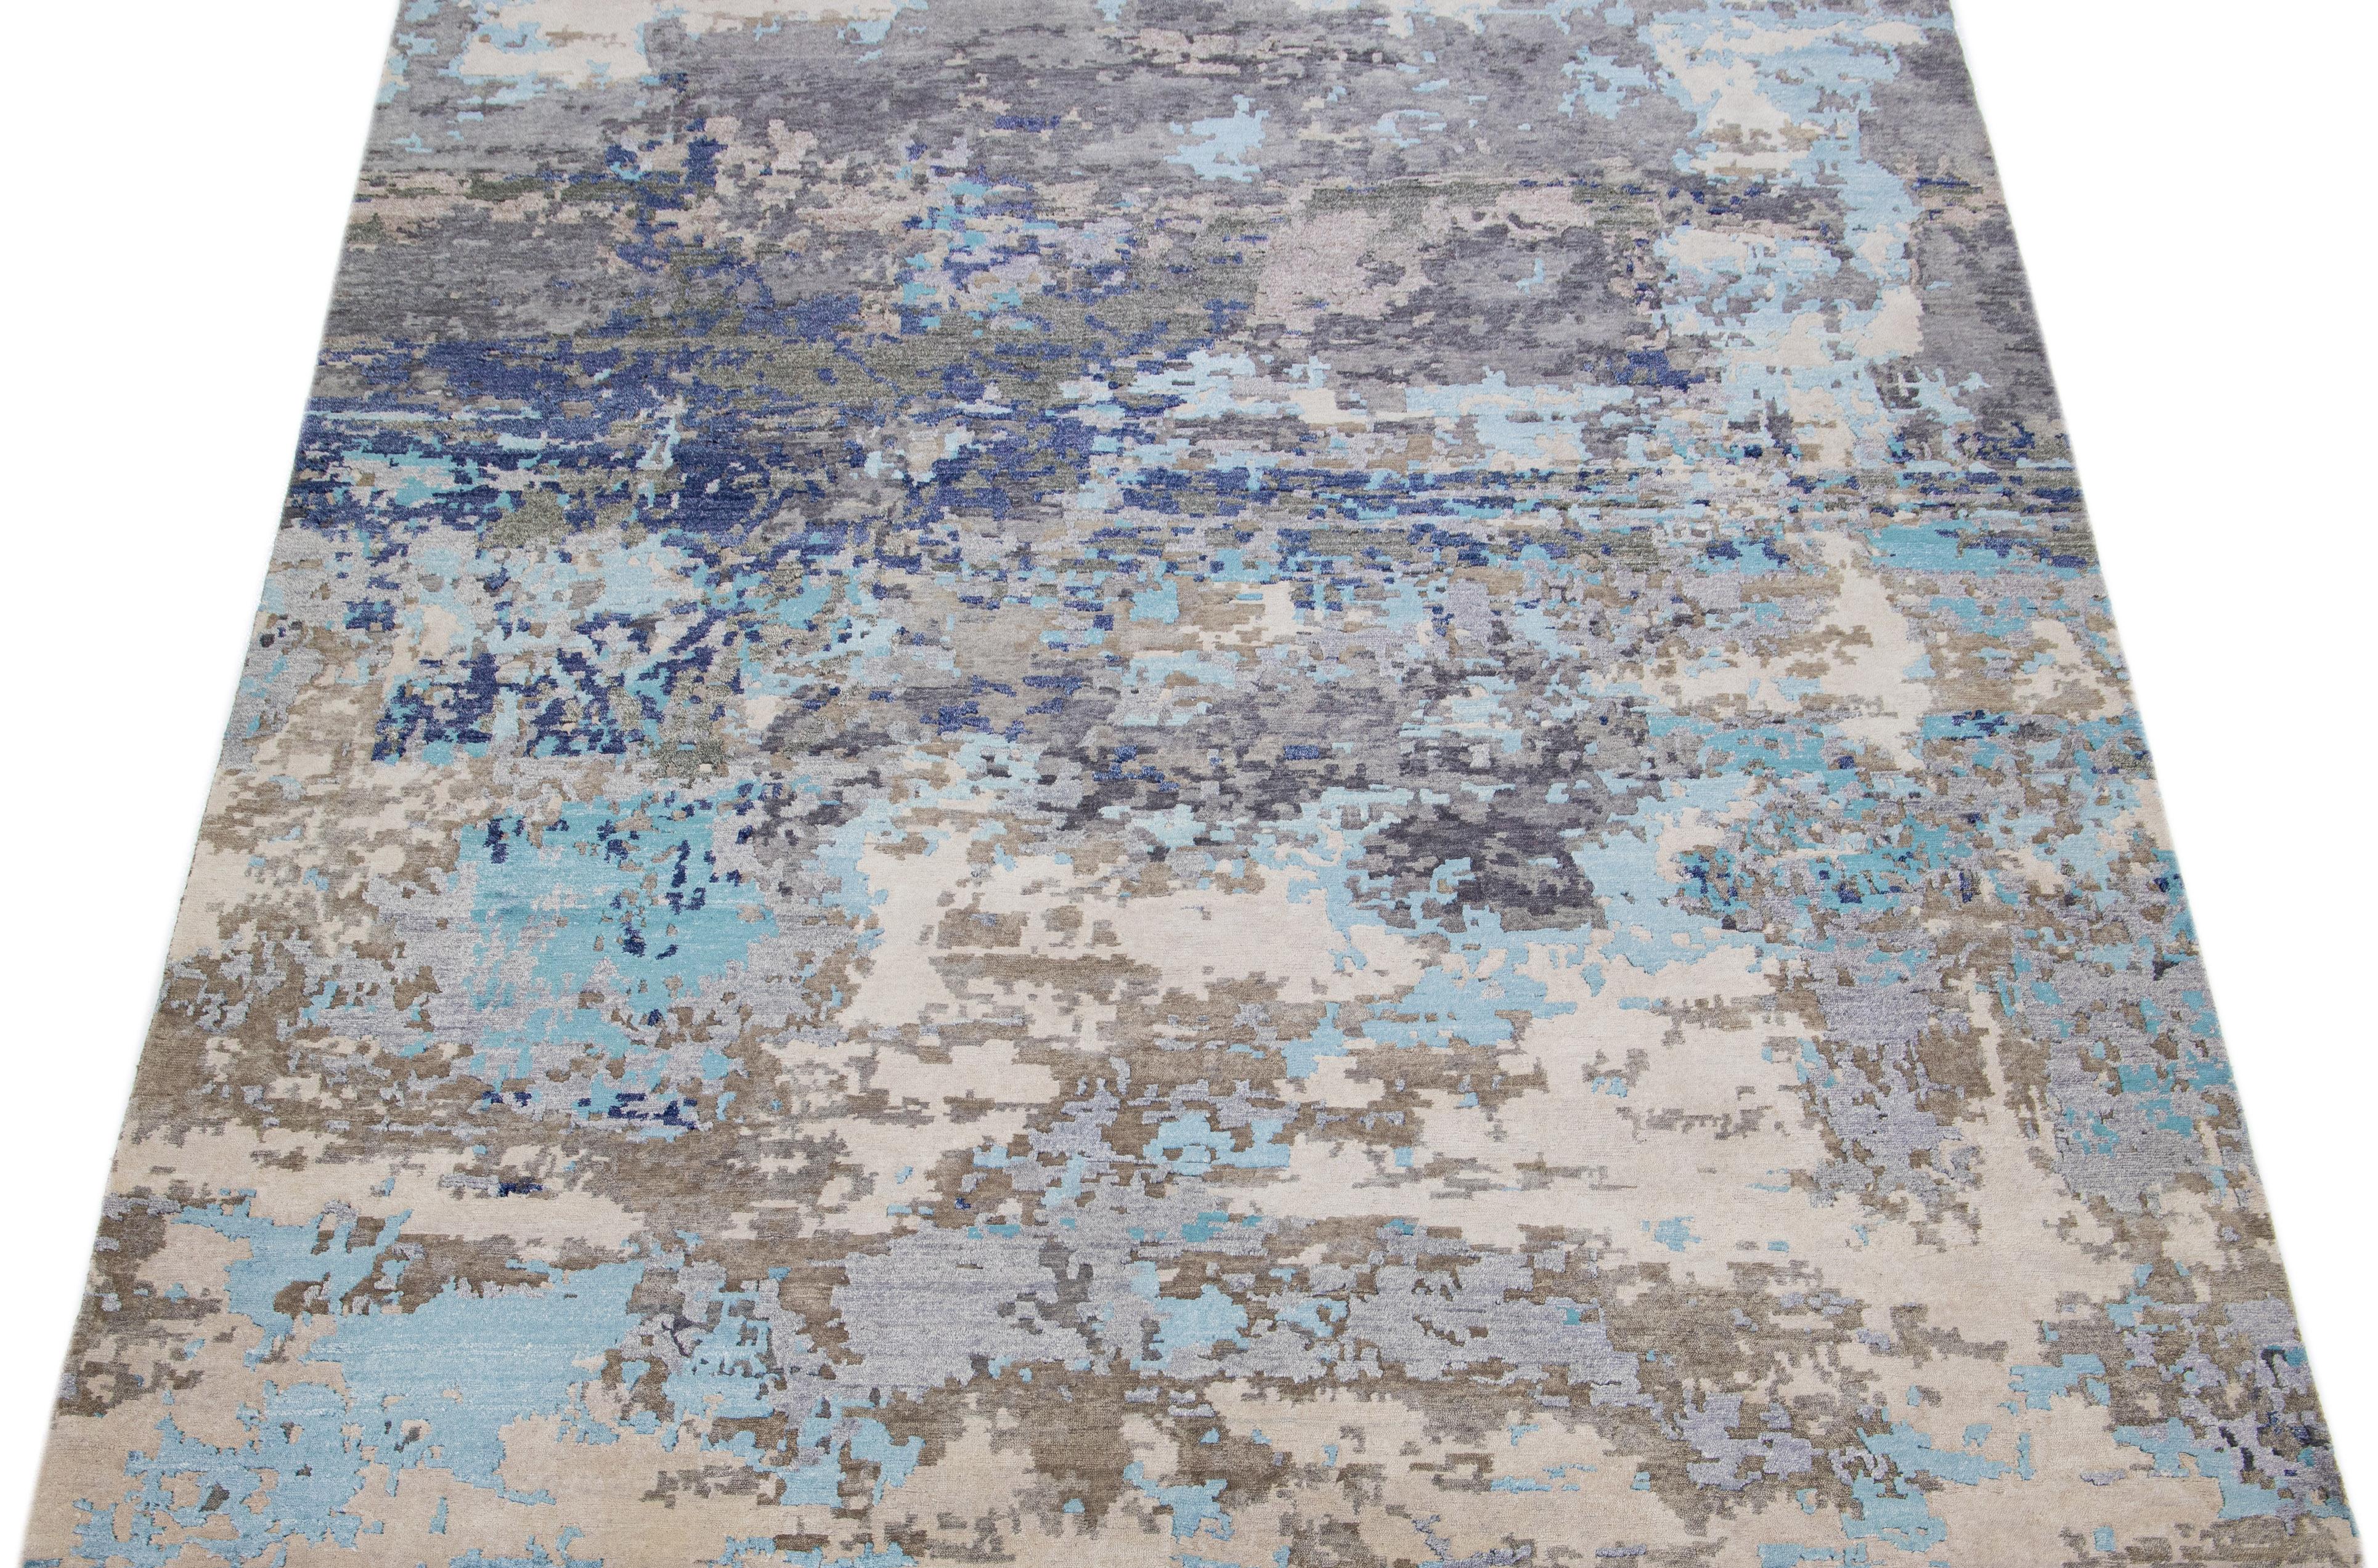 This Indian wool and silk blend rug features a light gray field with an abstract pattern detailing blue, brown, and beige colors. Its composed materials provide robustness and longevity, while its ornamental design infuses any room with